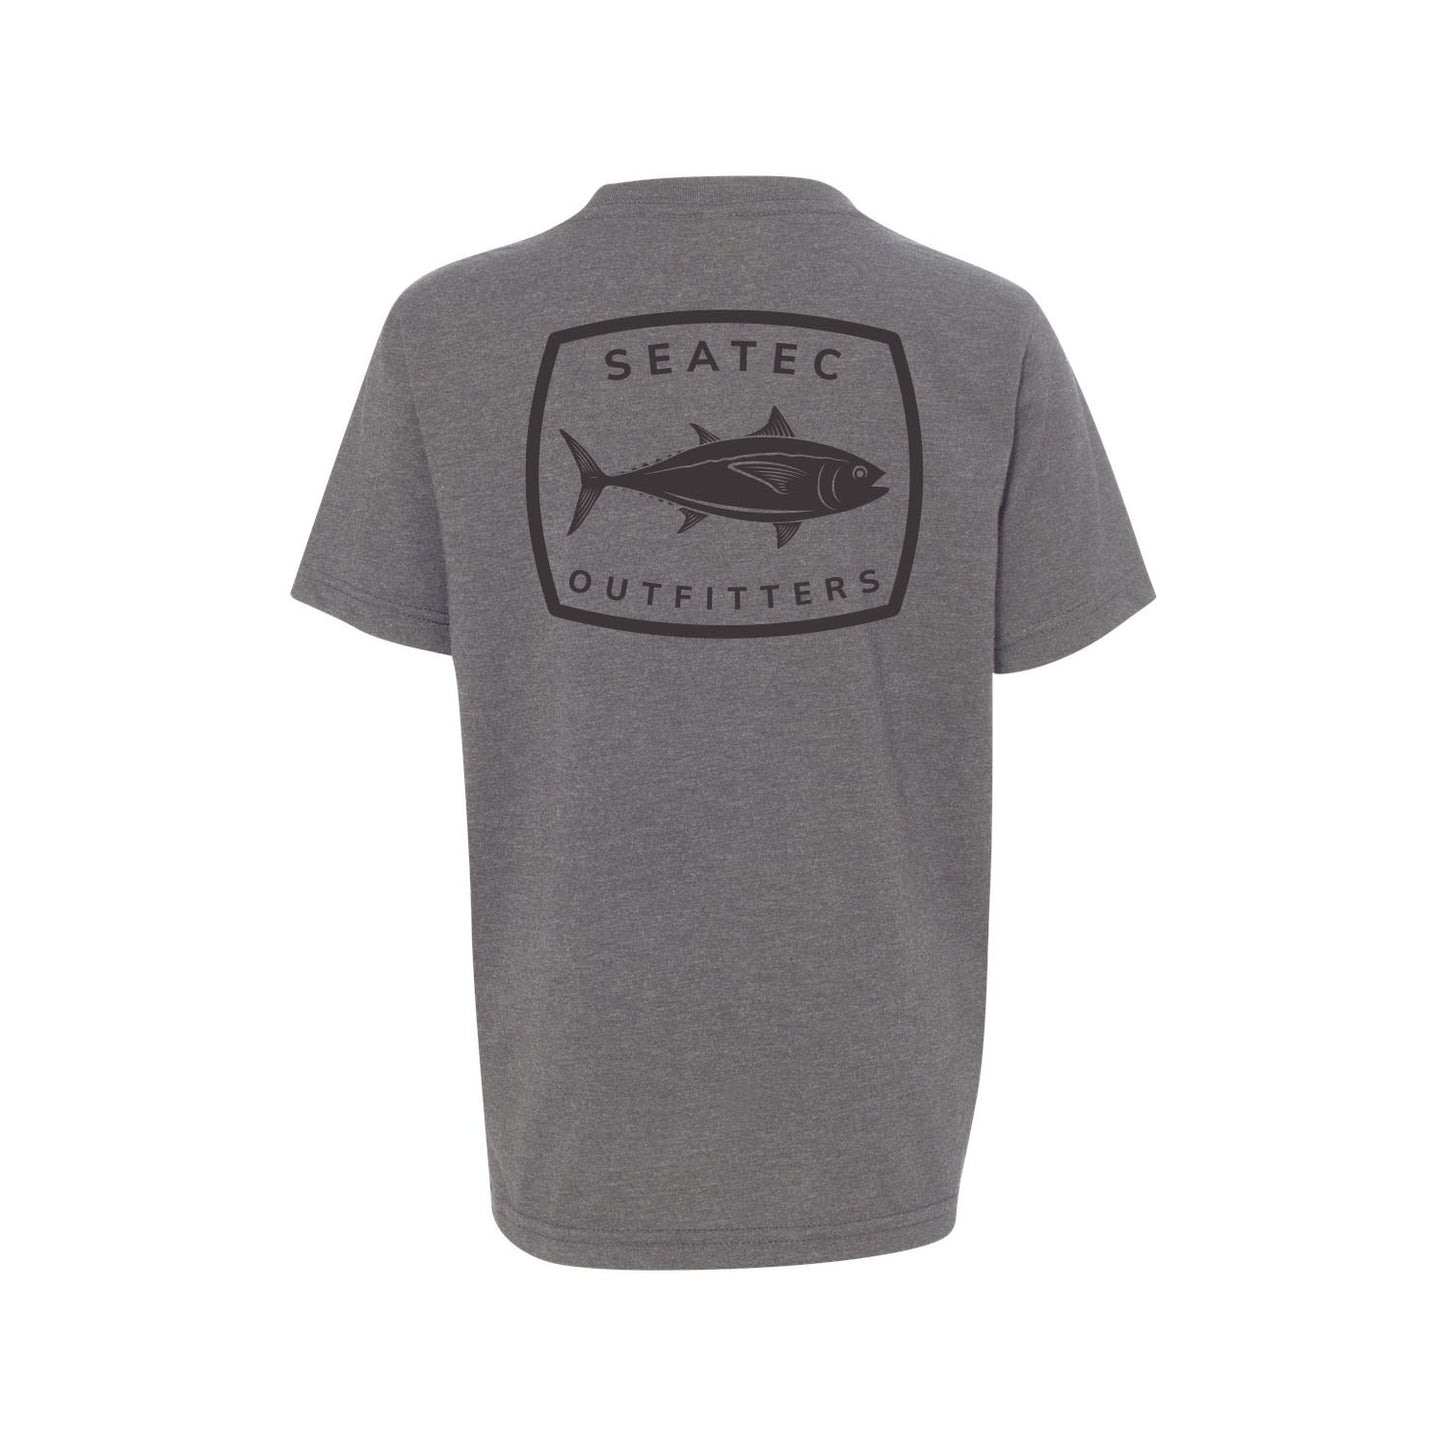 Seatec Outfitters Tuna Boy's Short Sleeve T-Shirt